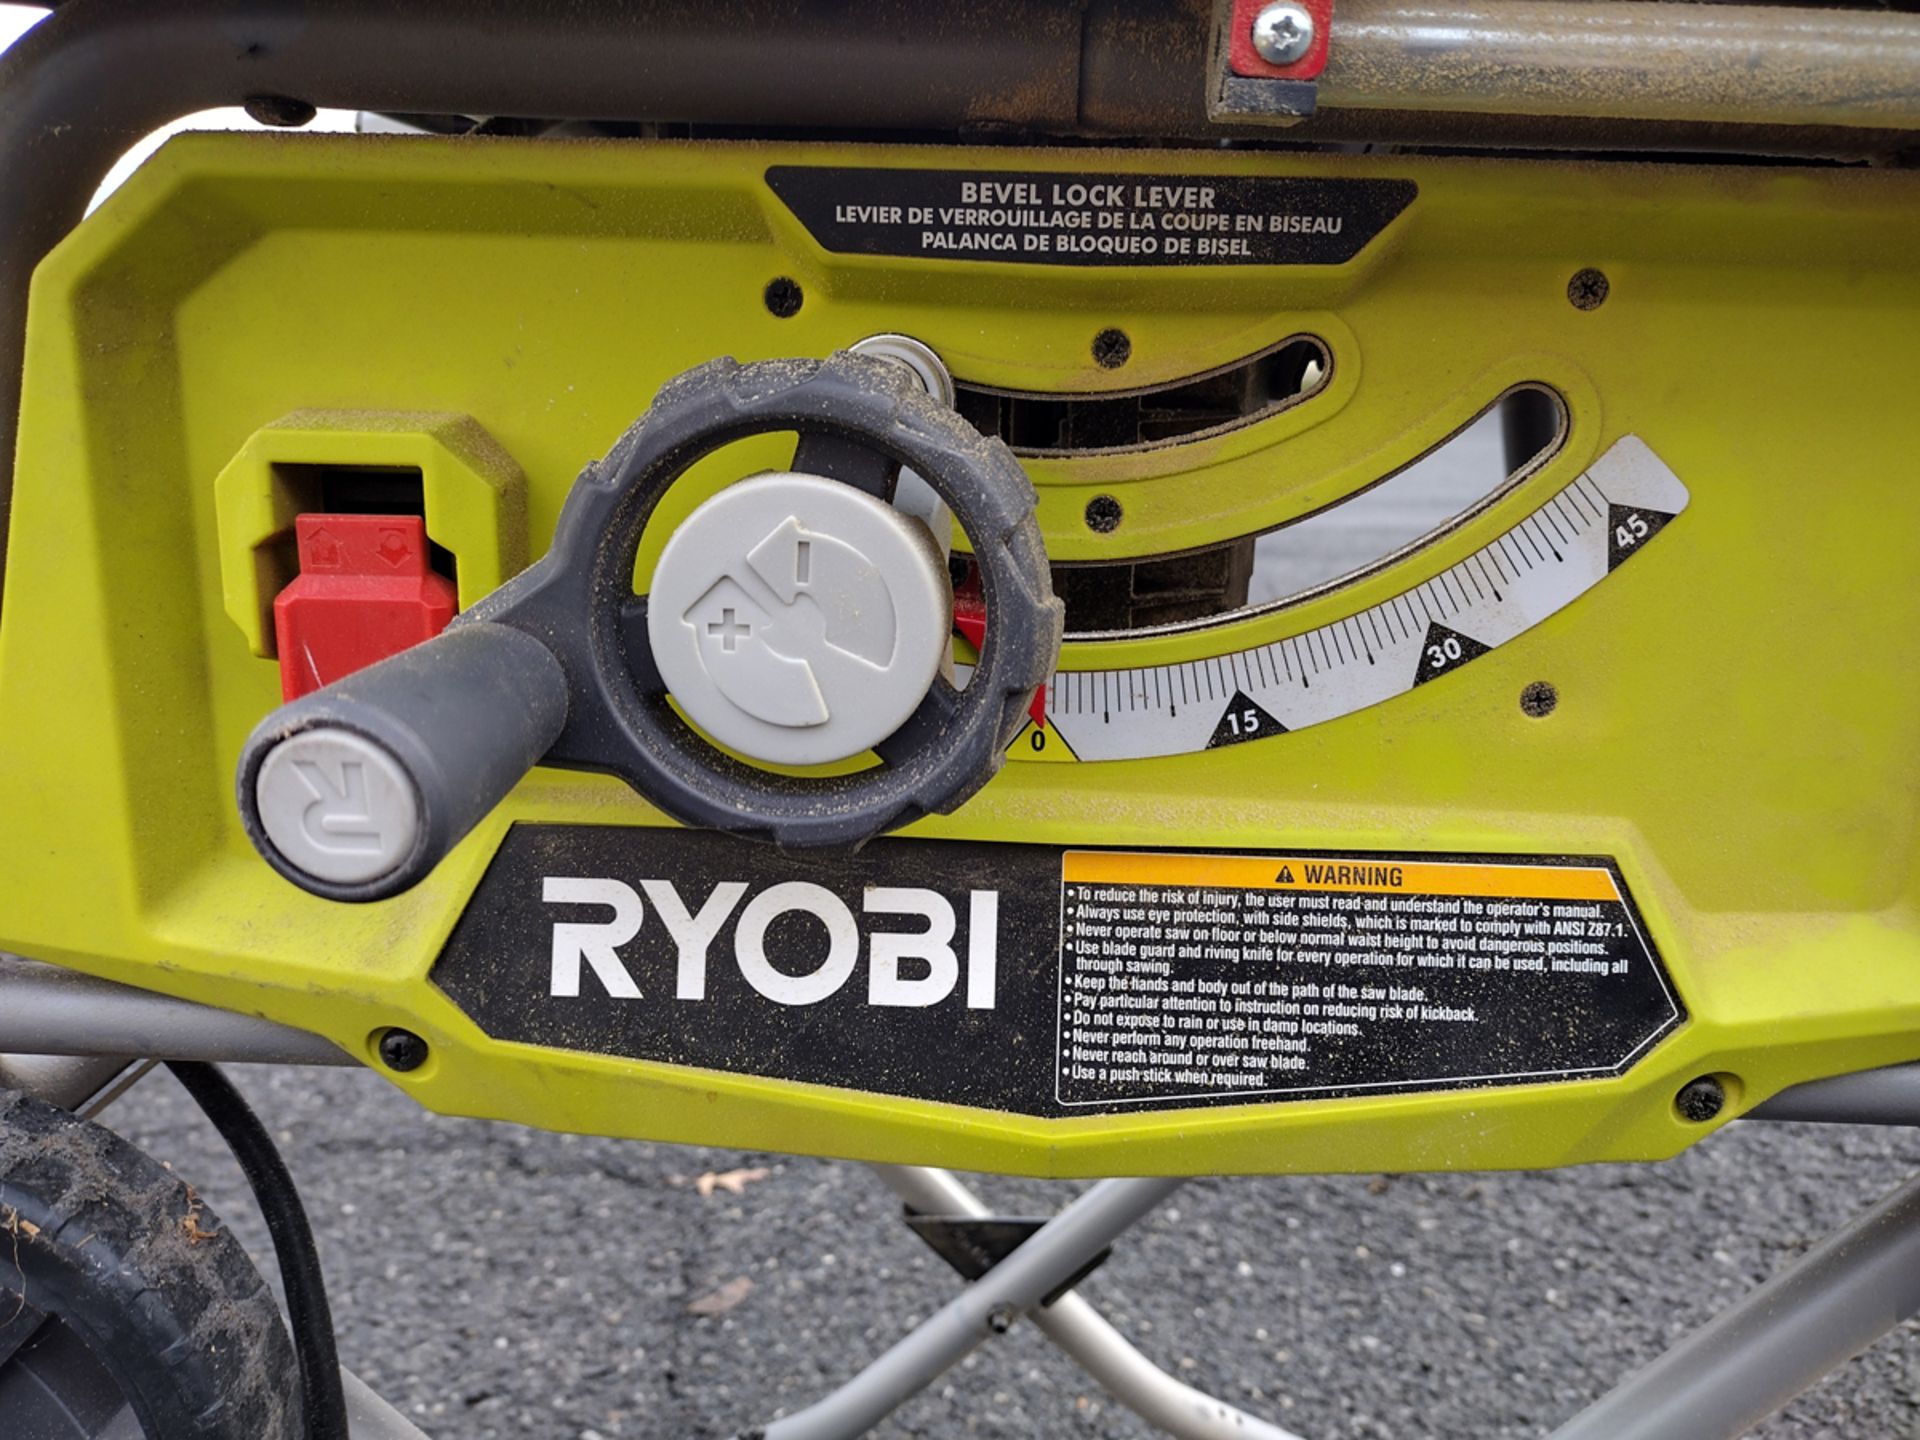 Ryobi RTS22 10 in. Table Saw with Rolling Stand - Image 3 of 5